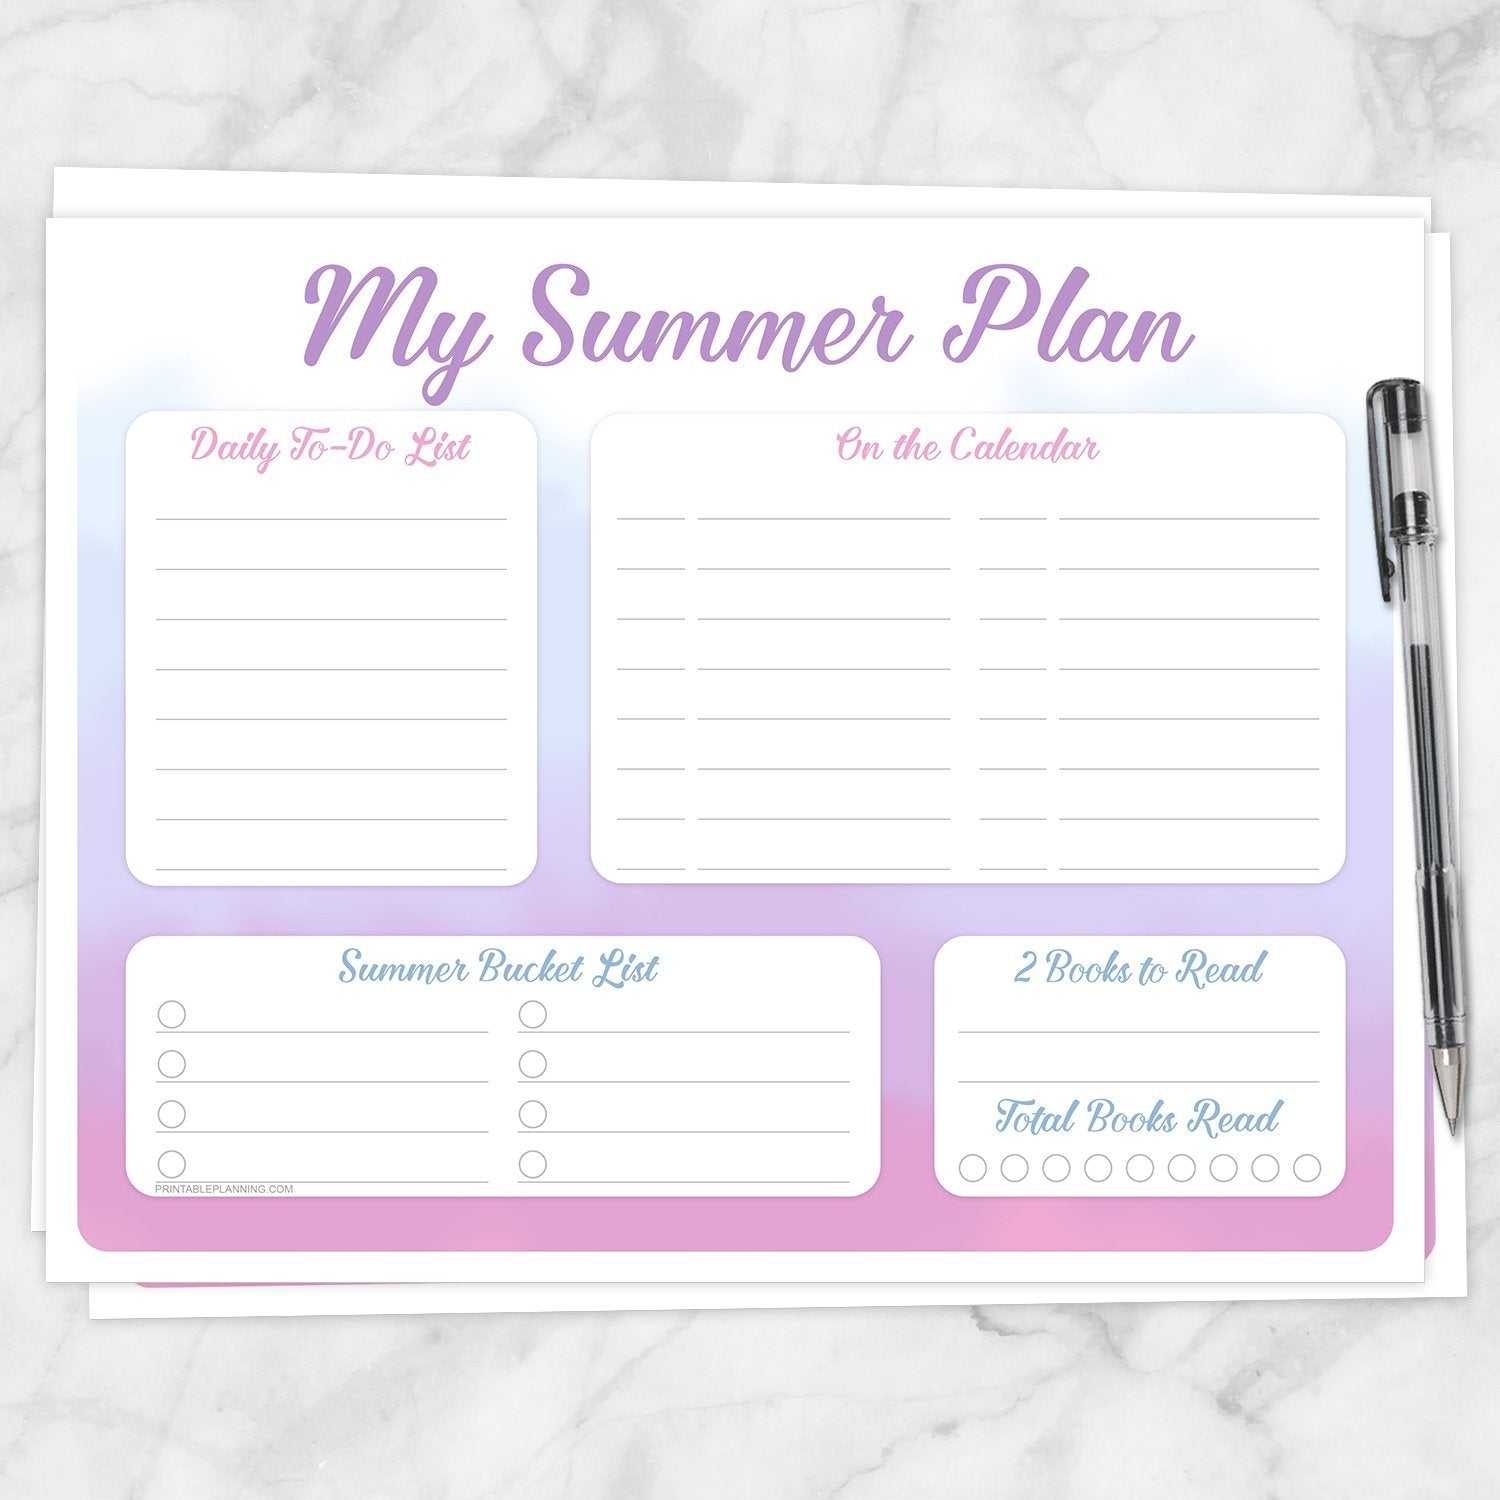 Printable My Summer Plan, Watercolor Planner Page in Pink Purple Blue at Printable Planning